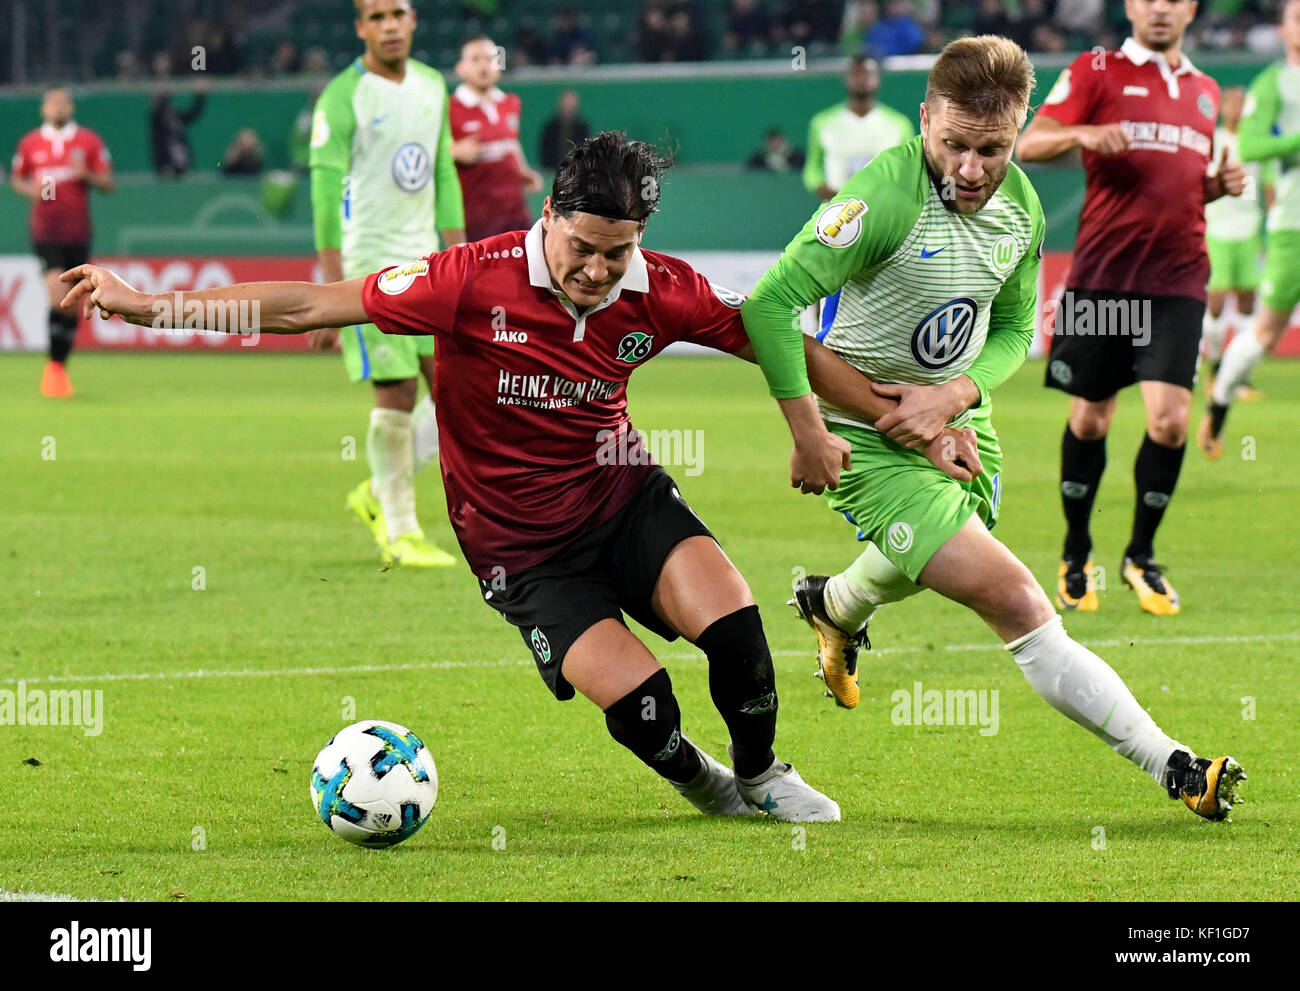 Wolfsburg's Jakub Blaszczykowski (R) and Hannover's Miiko Albornoz vying for the ball during the DFB Cup soccer match between VfL Wolfsburg and Hannover 96 in the Volkswagen Arena in Wolfsburg, Germany, 25 October 2017. (EMBARGO CONDITIONS - ATTENTION: The DFB prohibits the utilisation and publication of sequential pictures on the internet and other online media during the match (including half-time). ATTENTION: BLOCKING PERIOD! The DFB permits the further utilisation and publication of the pictures for mobile services (especially MMS) and for DVB-H and DMB only after the end of the match.) Stock Photo